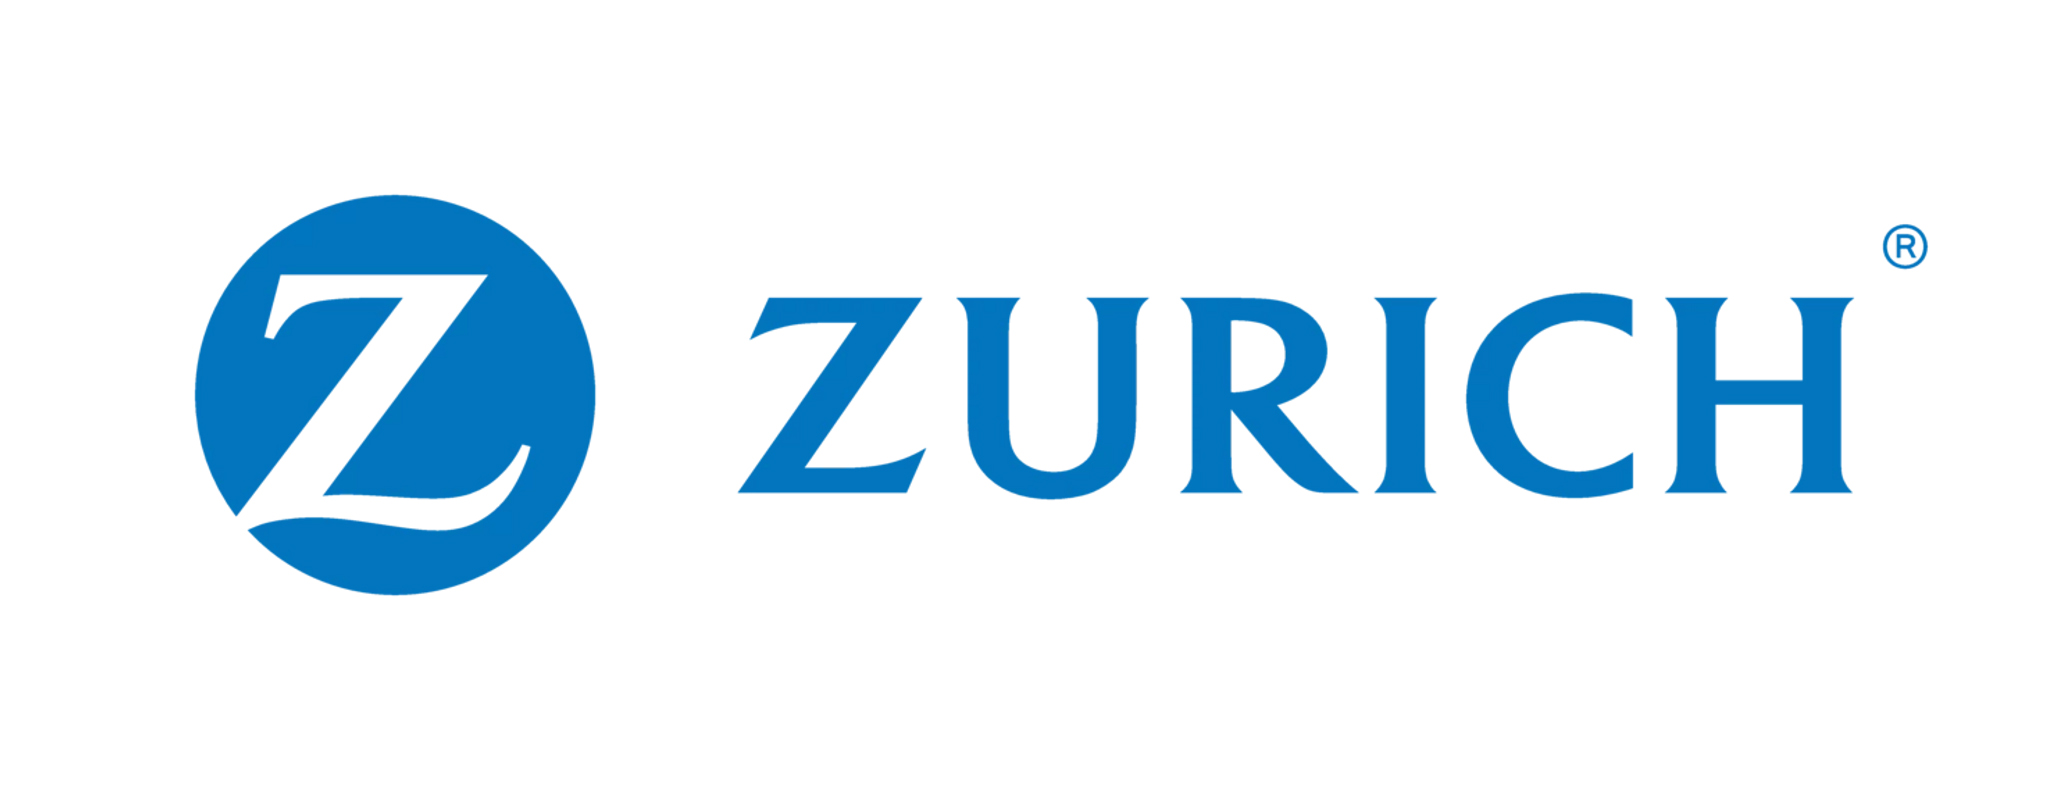 Temporary Staffing - Daily Site Safety Evaluation - Zurich